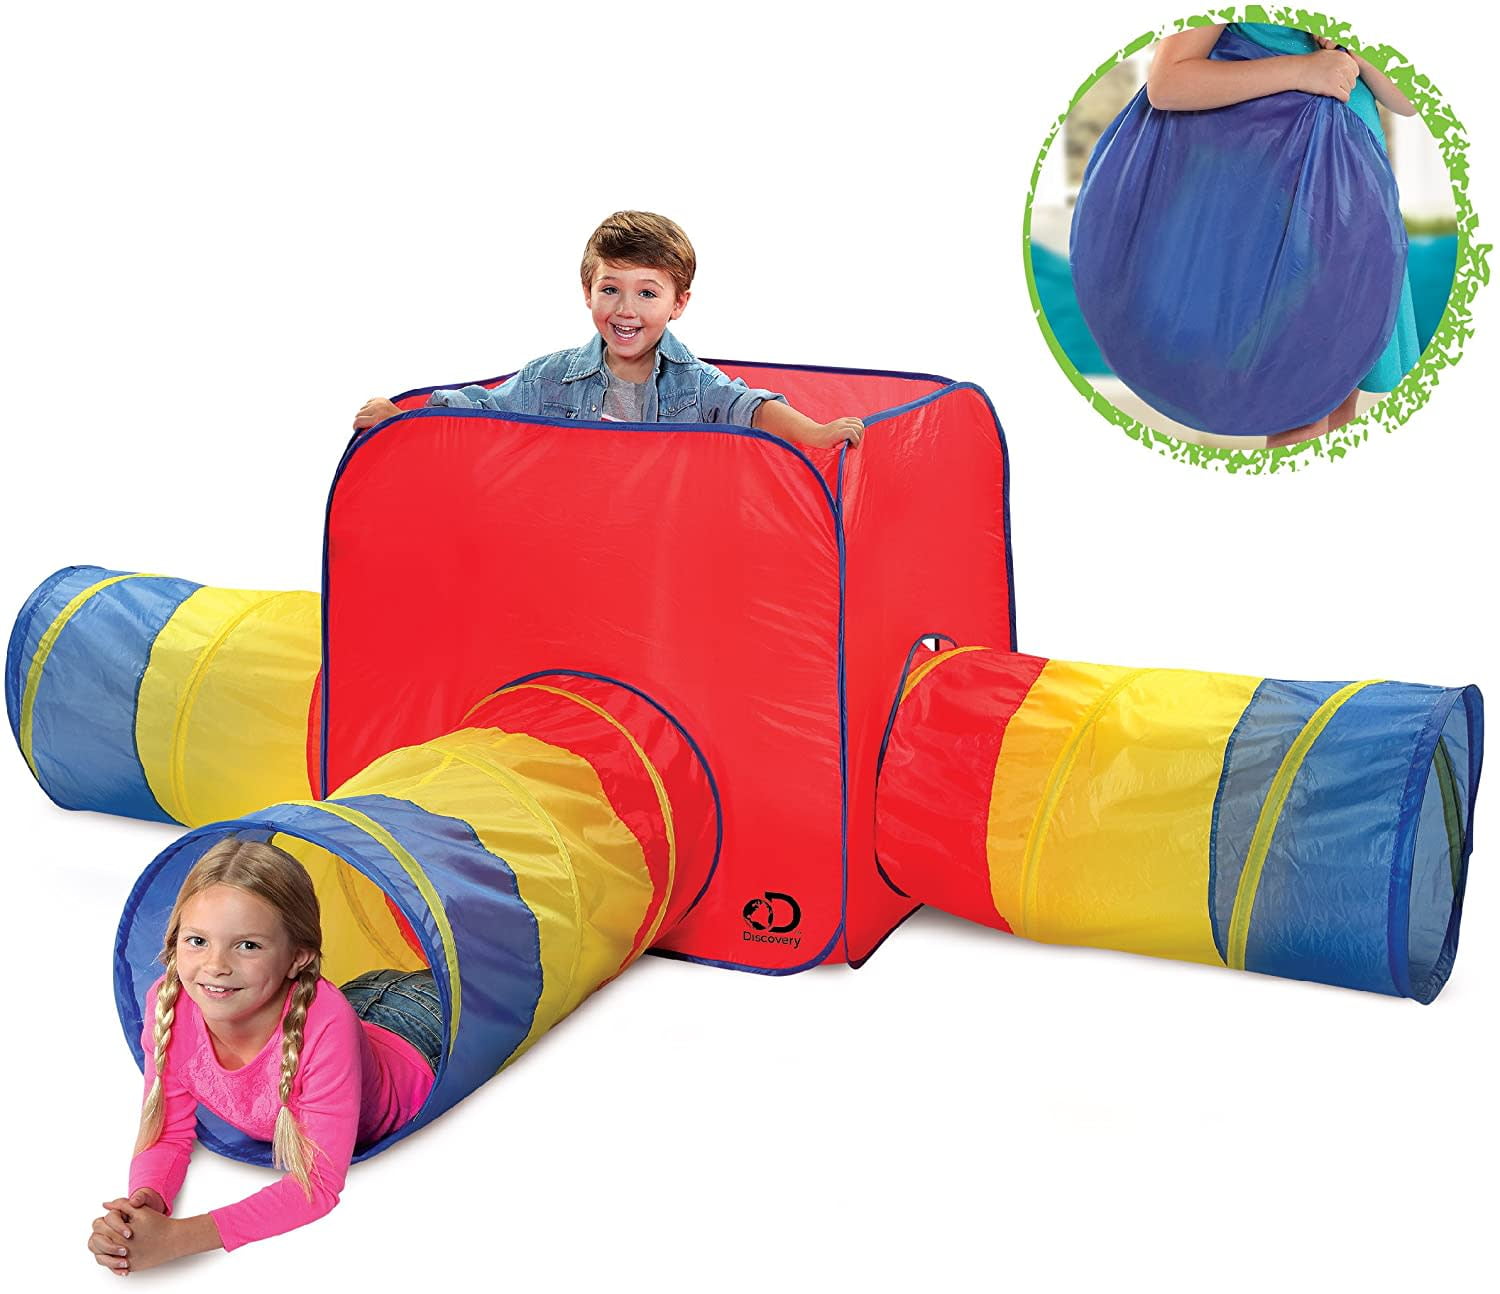 FAST EXP SHIP!! Kids 6ft Pop-up Play Tunnel Toy for Boys w/ Mesh Window Case 